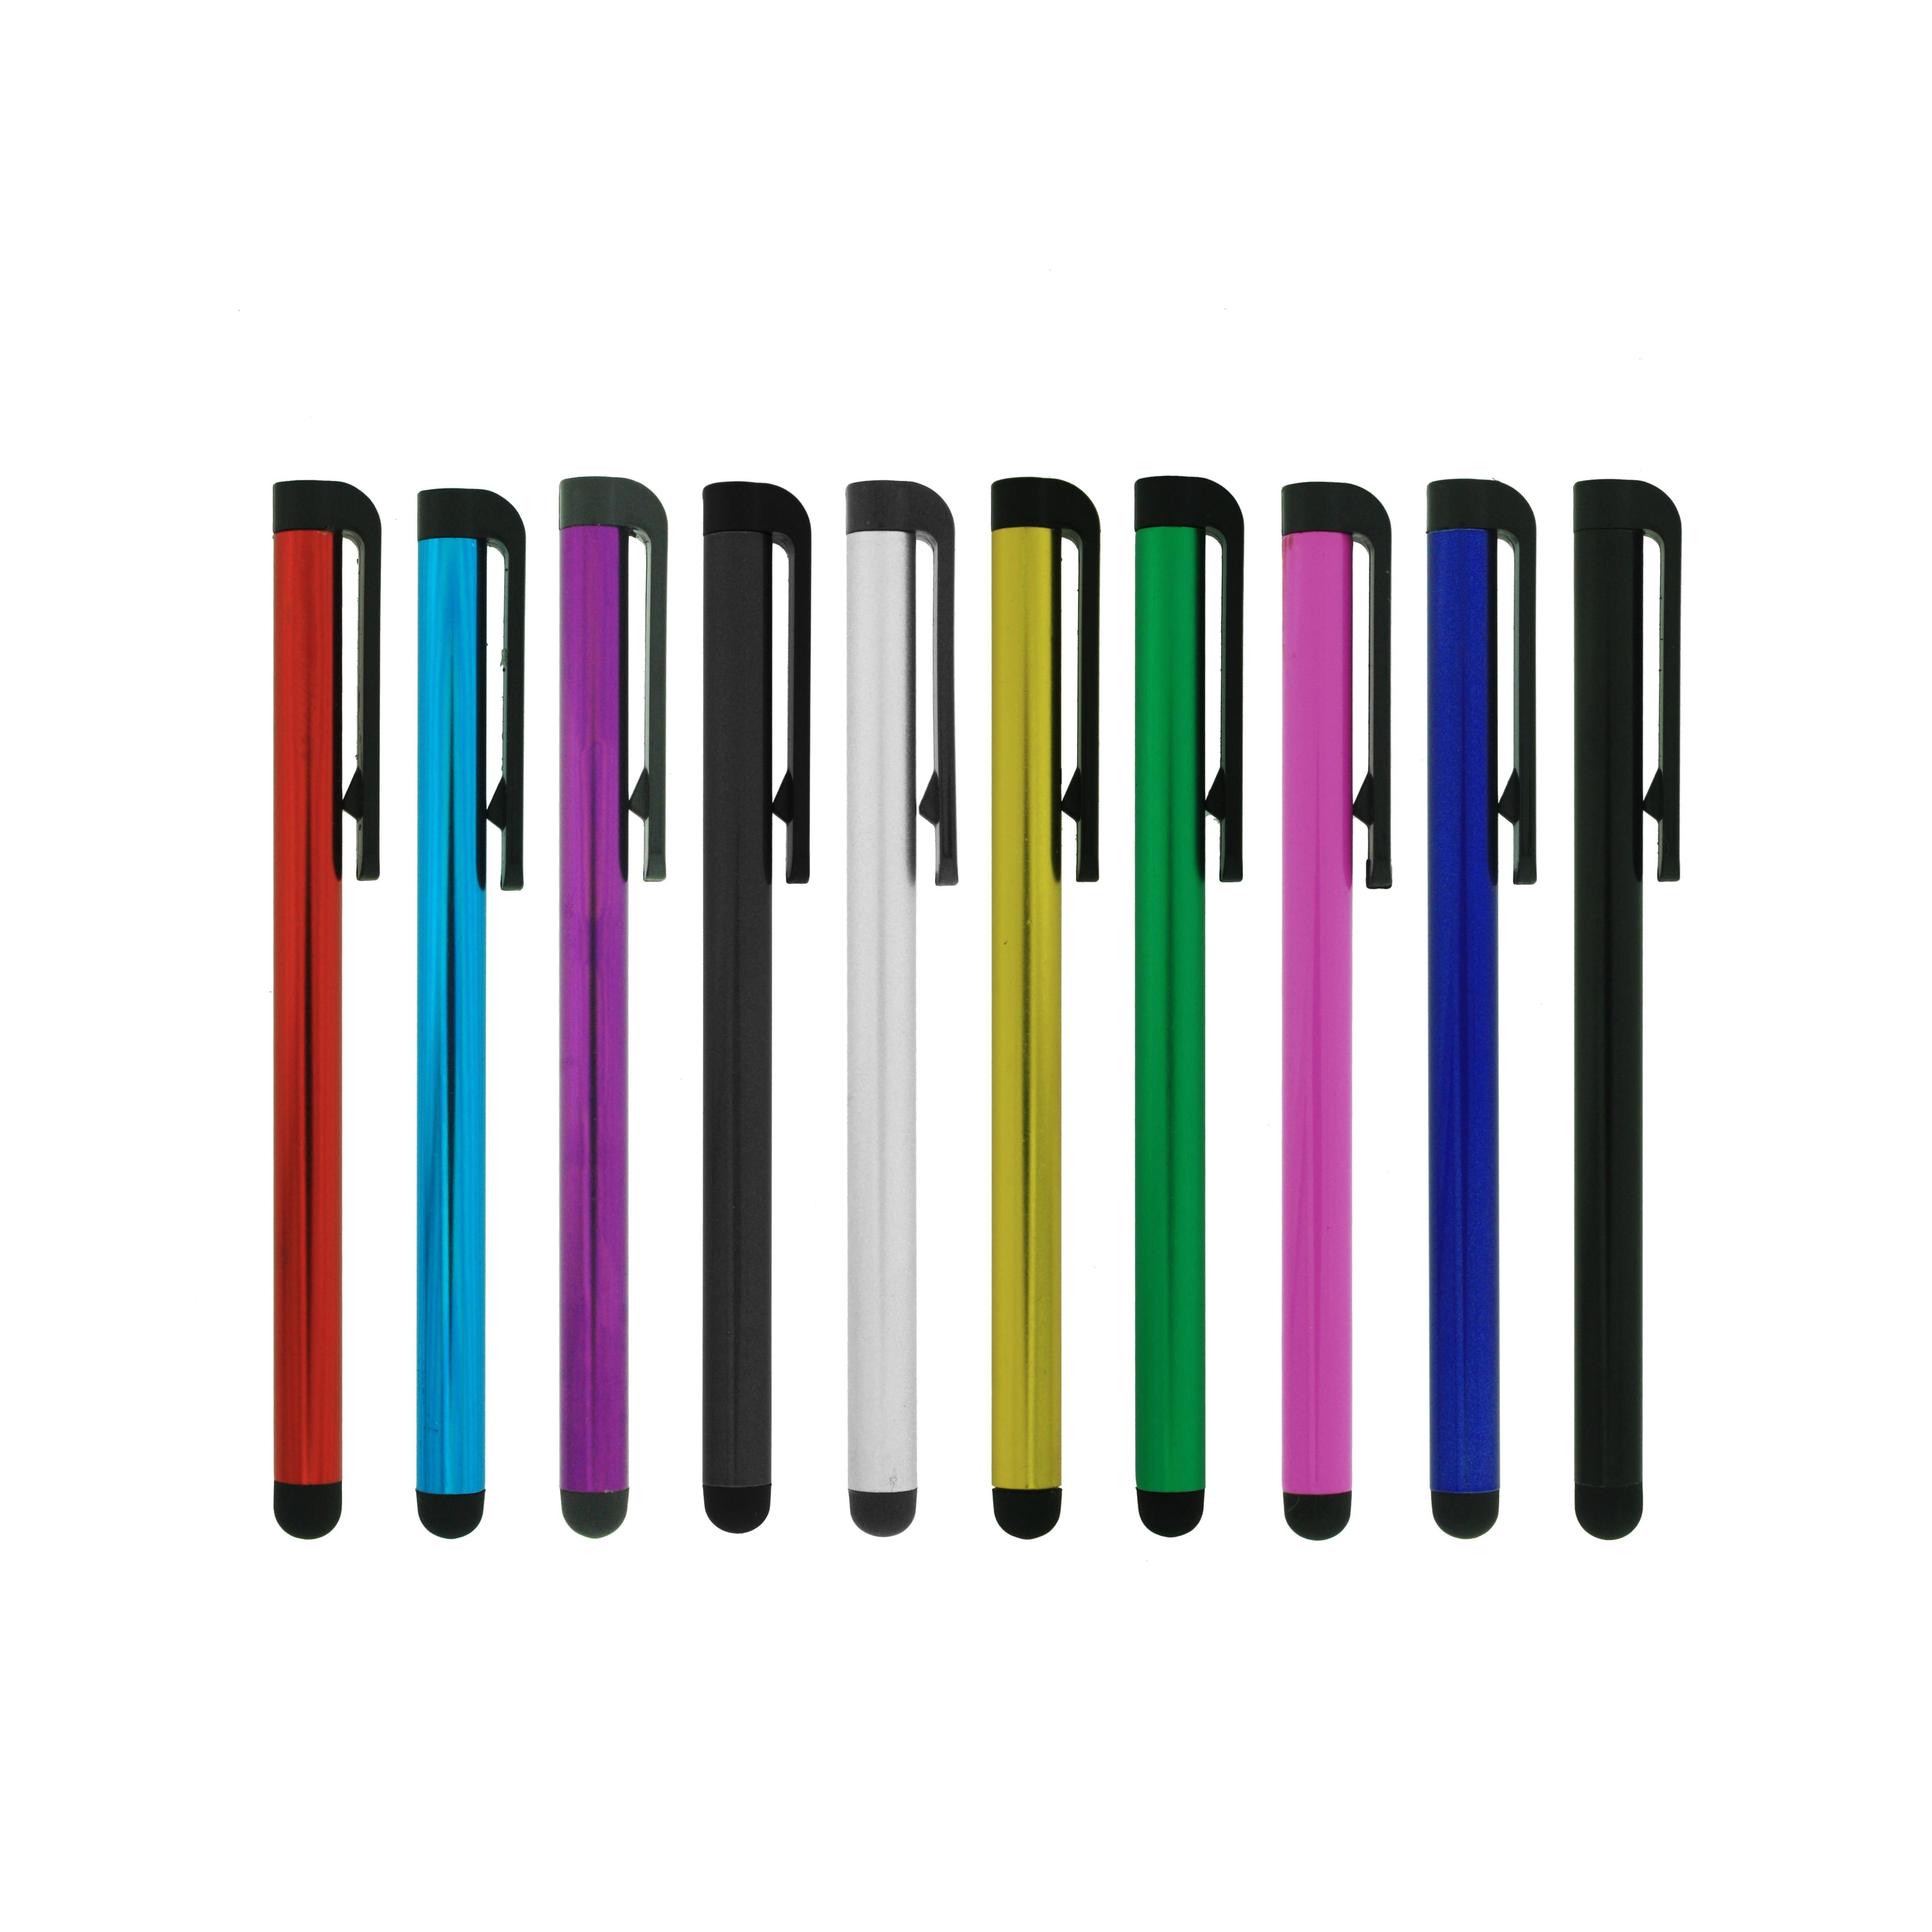 Precision Touch 10 PACK Stanley Stylus Touch Pen For iPad, iPhone, Samsung Galaxy   Multi Color 